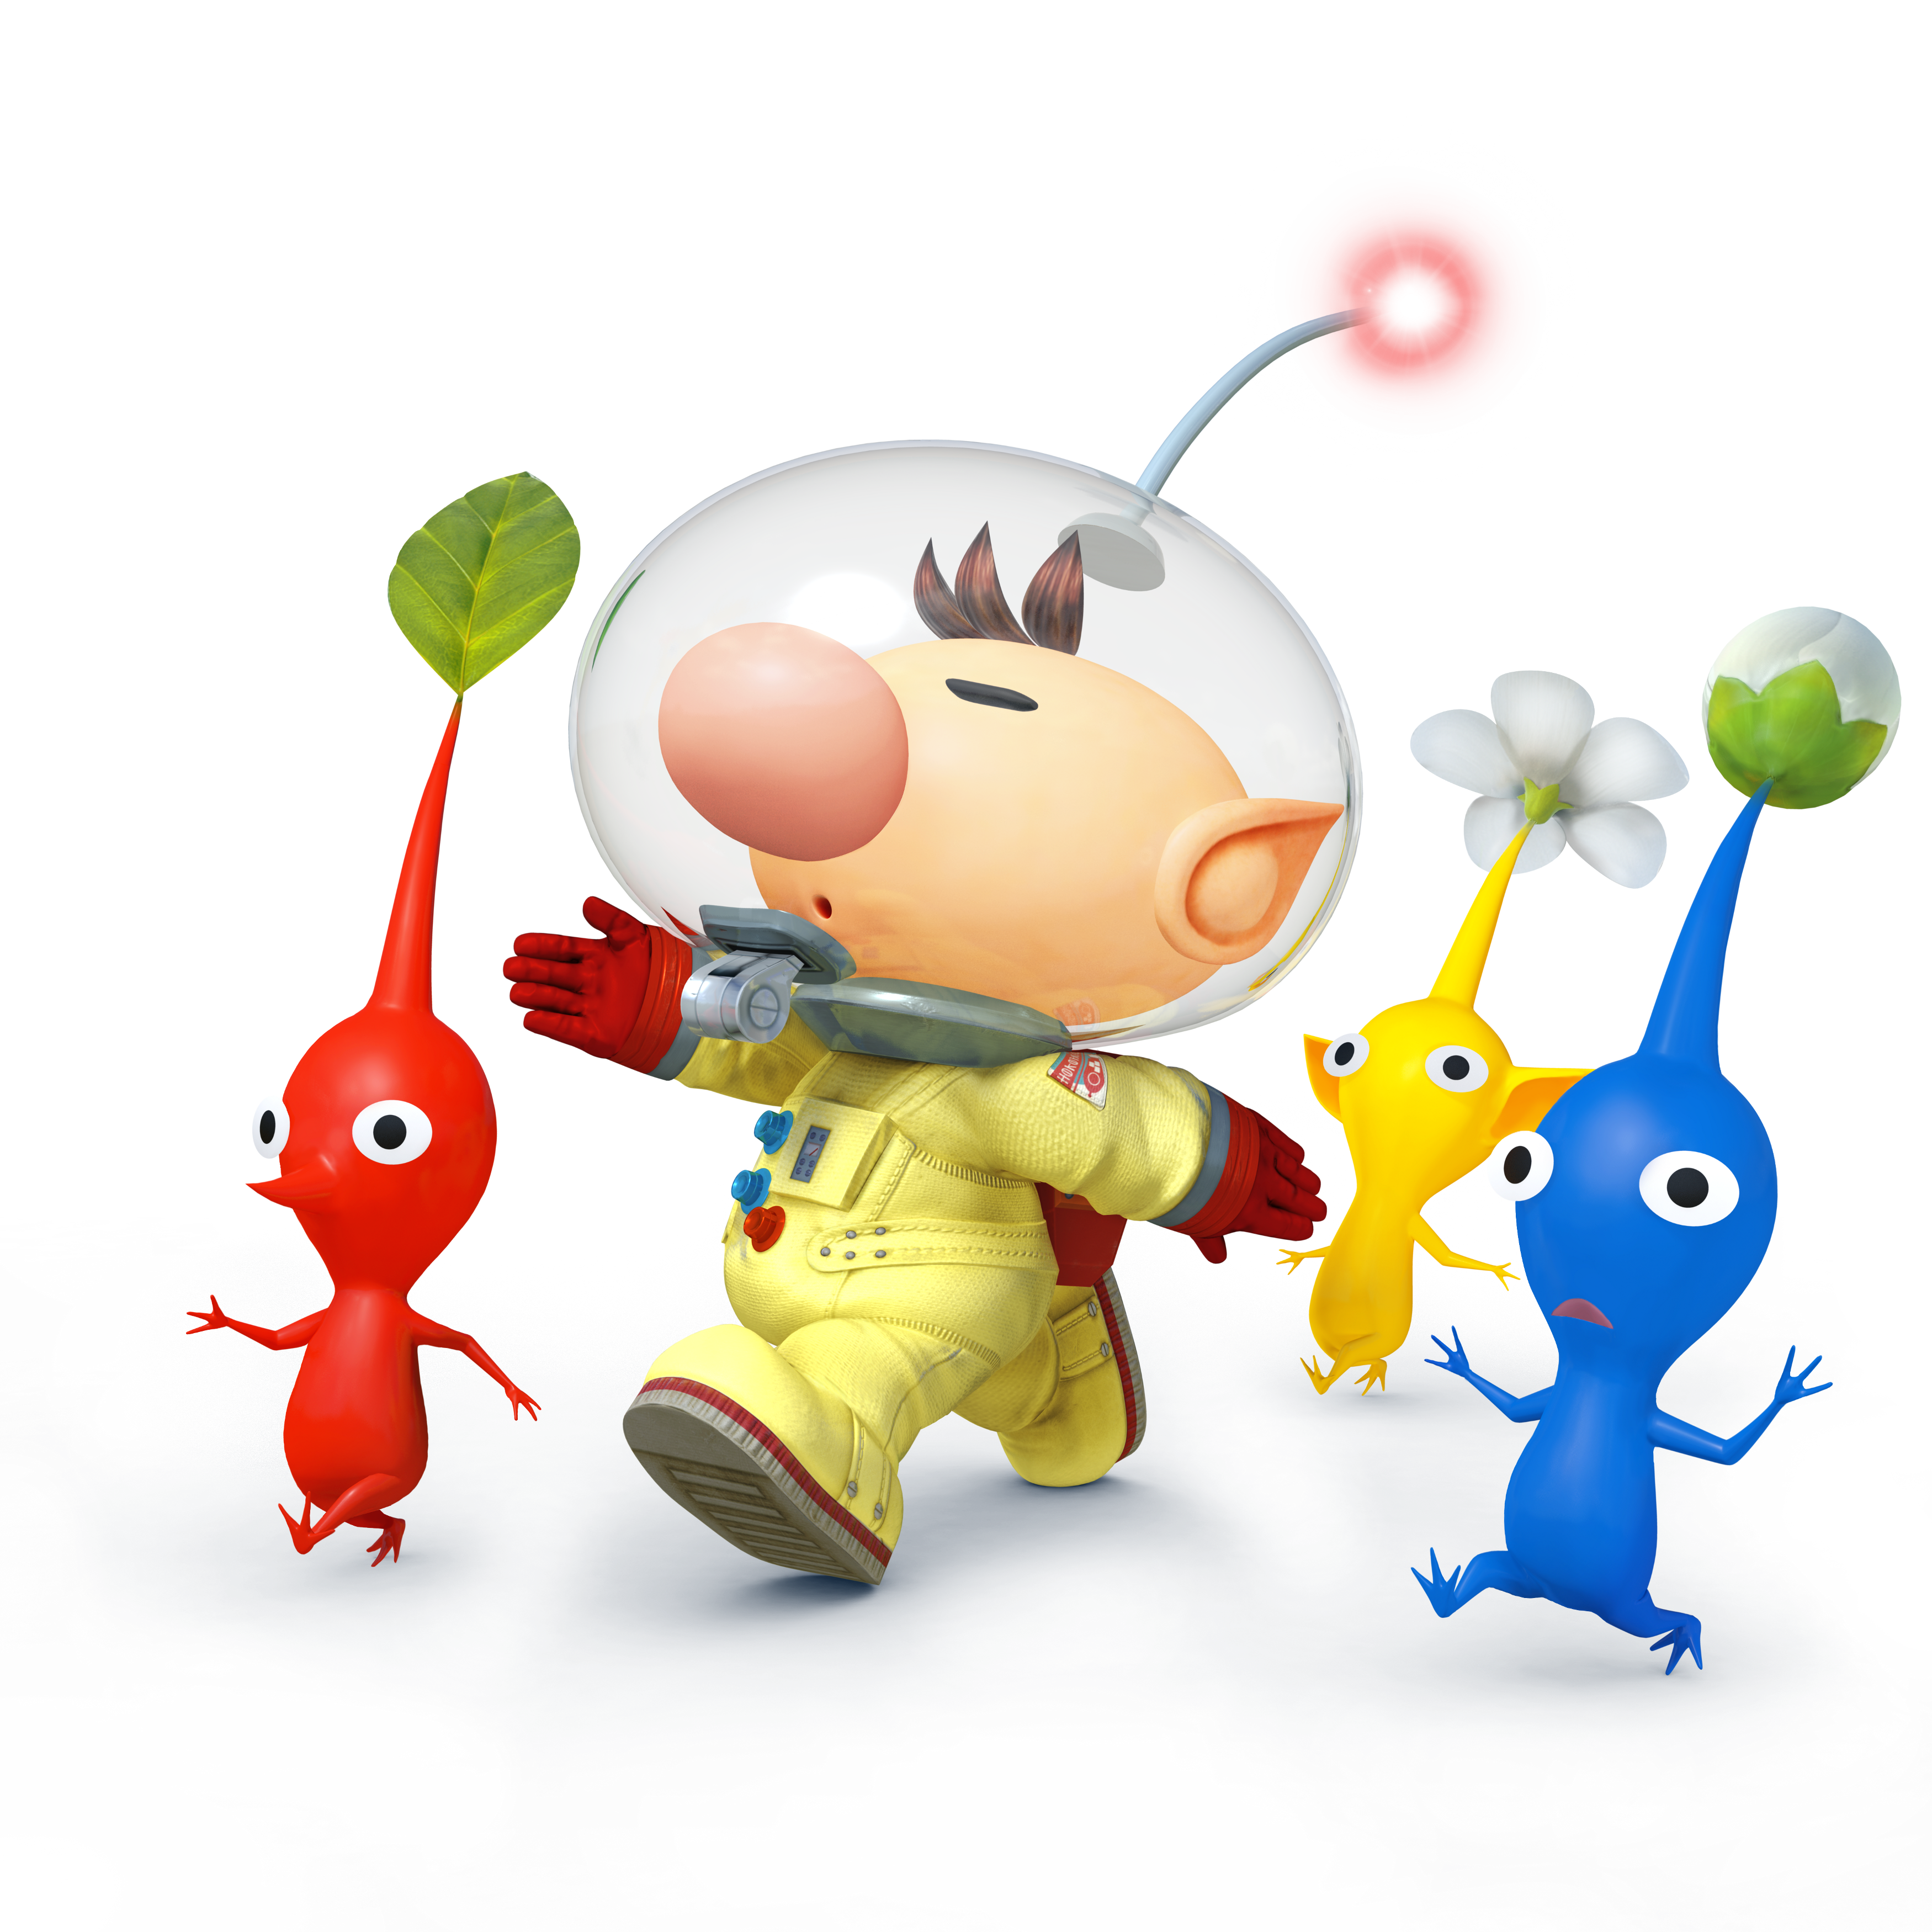 Captain_Olimar_and_Pikmin_-_Super_Smash_Bros._for_Nintendo_3DS_and_Wii_U